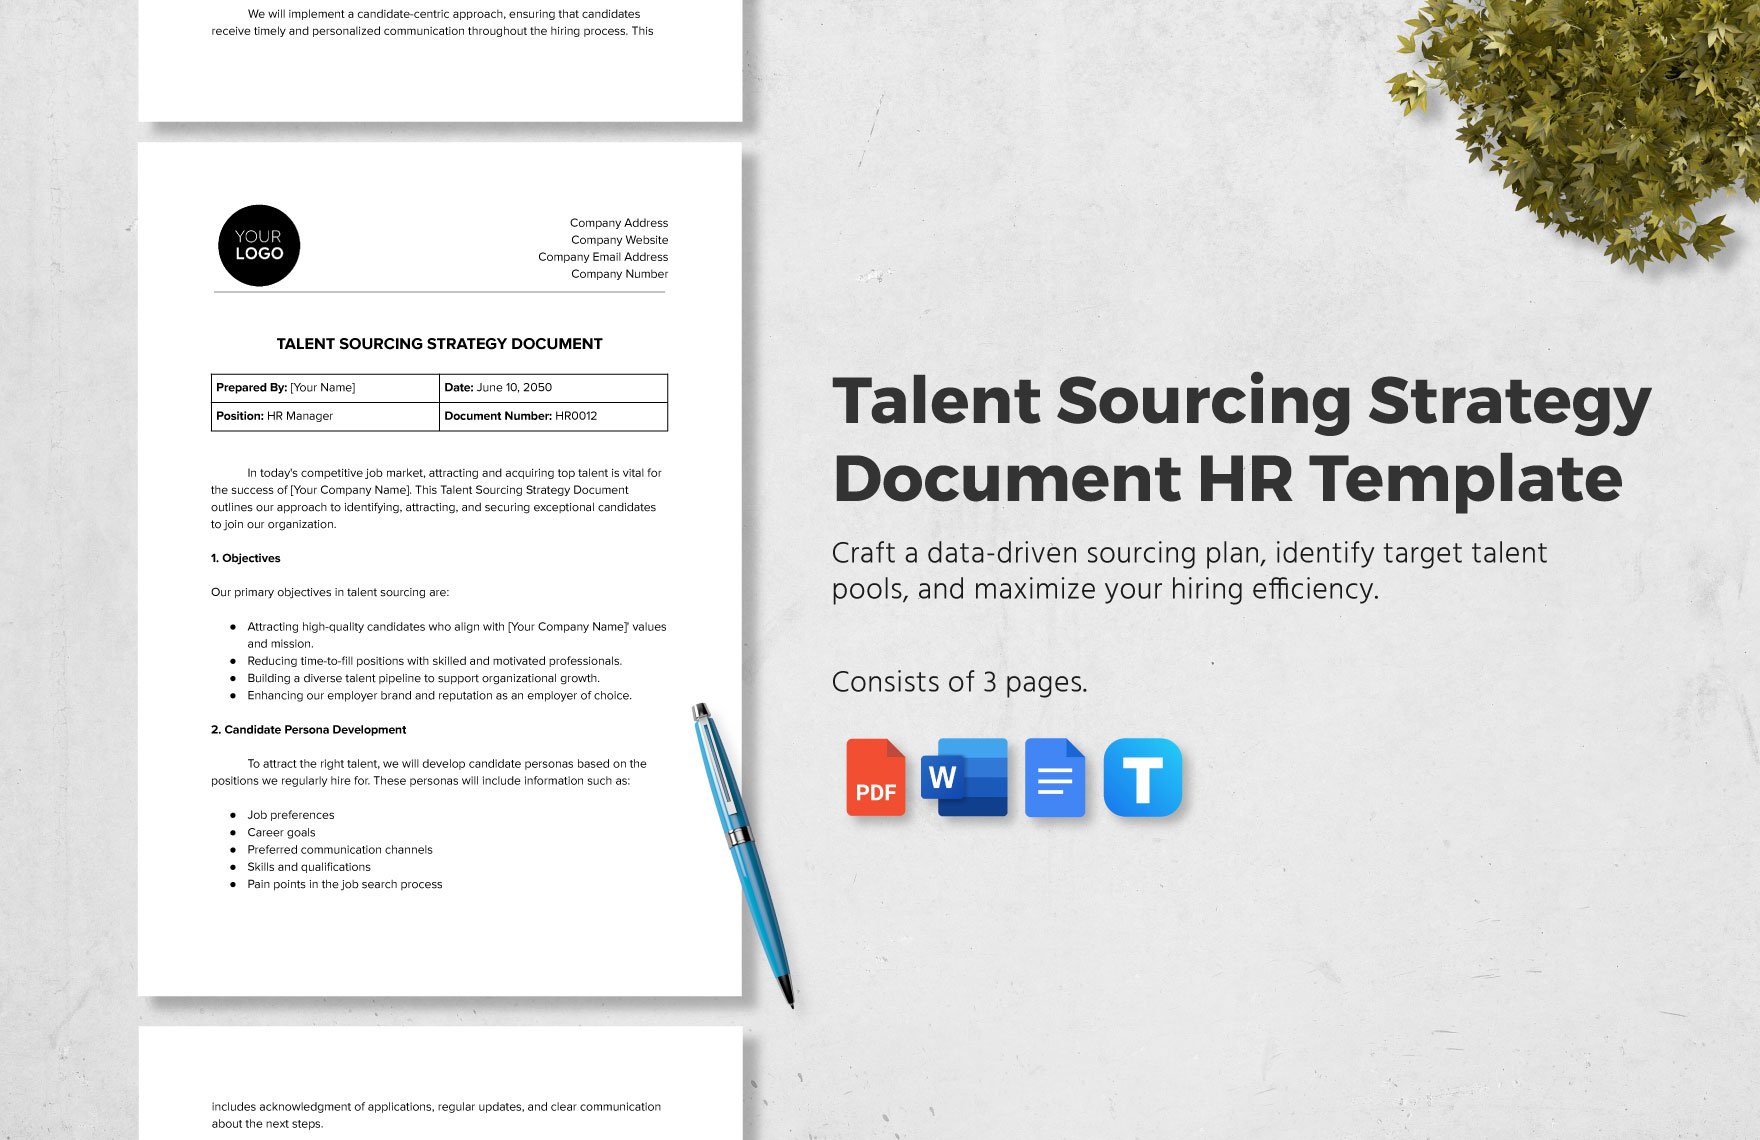 Talent Sourcing Strategy Document HR Template in Word, Google Docs, PDF